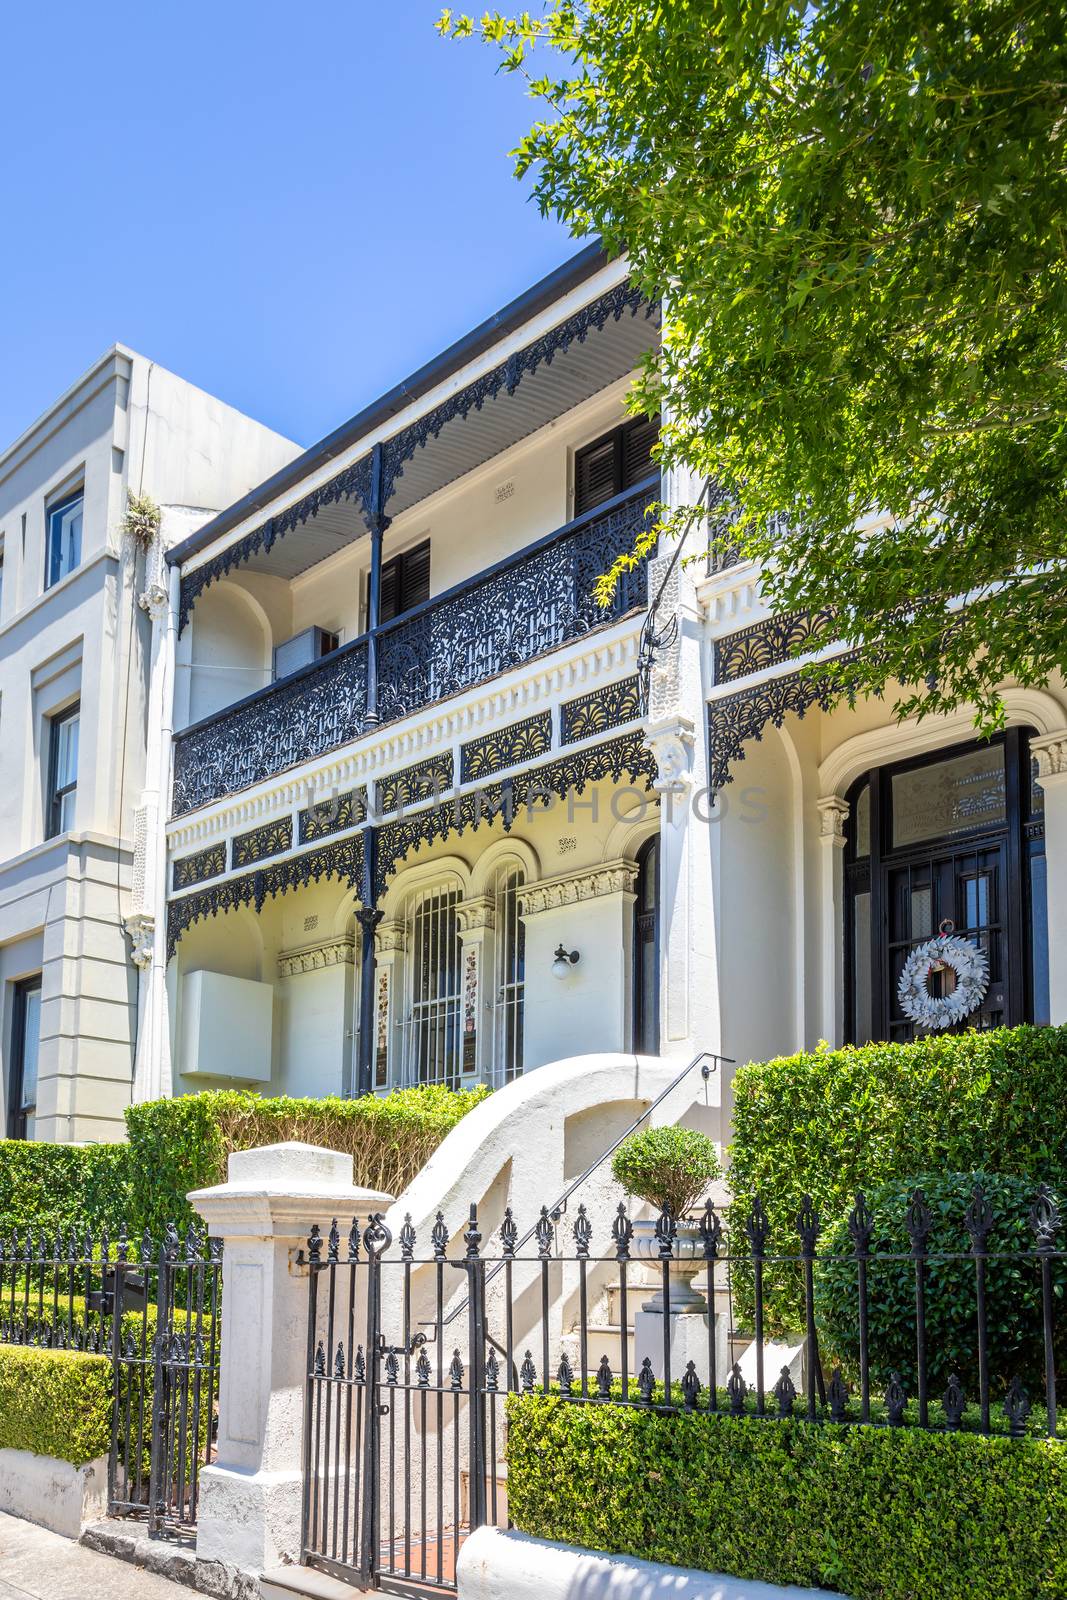 An image of a typical terrace house in Sydney Australia